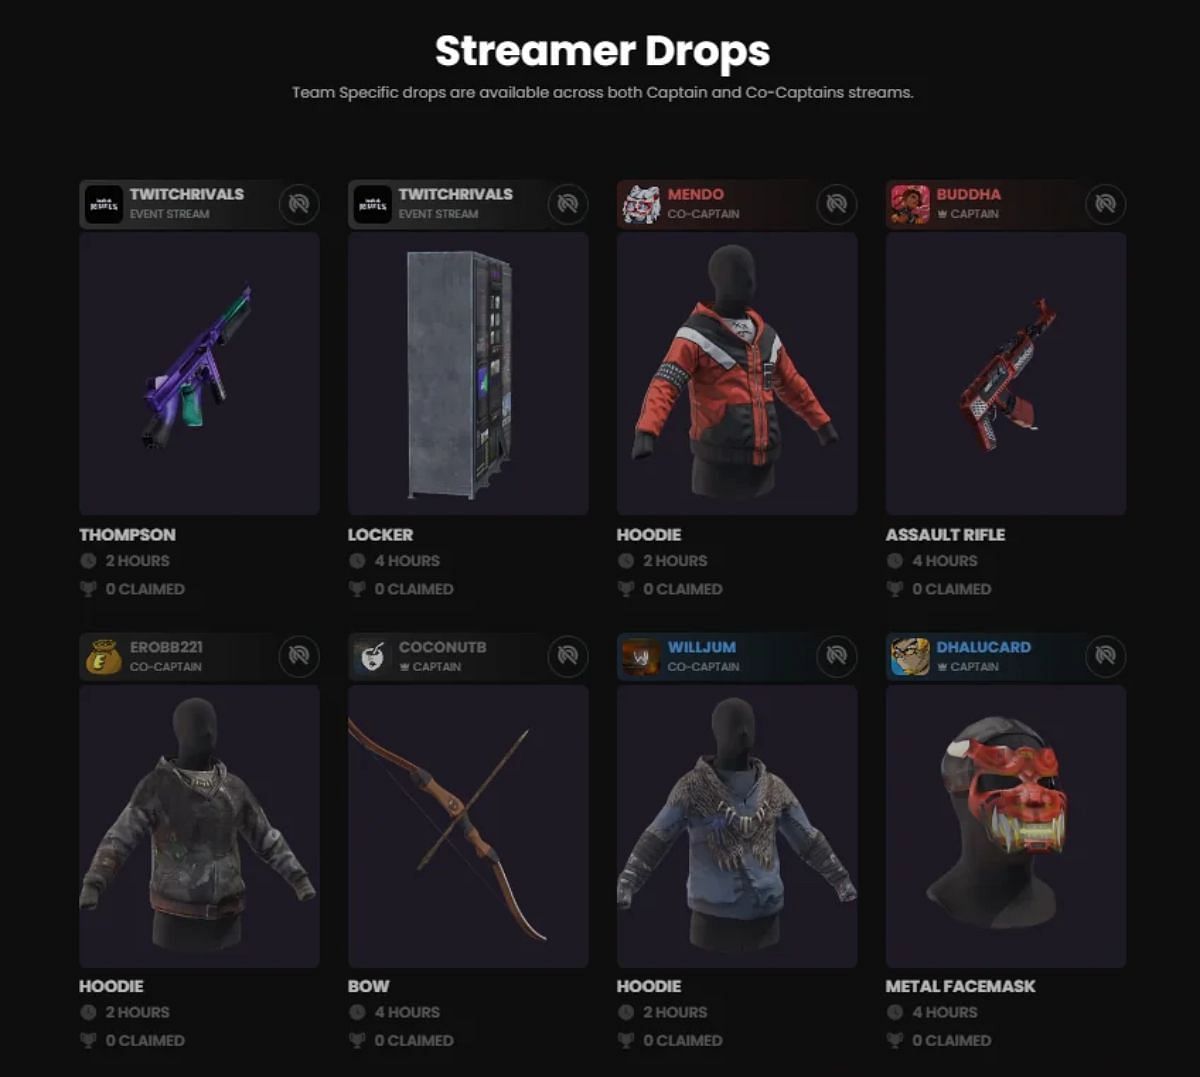 Twitch Rivals 3 - Streamer specific drops (Image via Facepunch Studios)